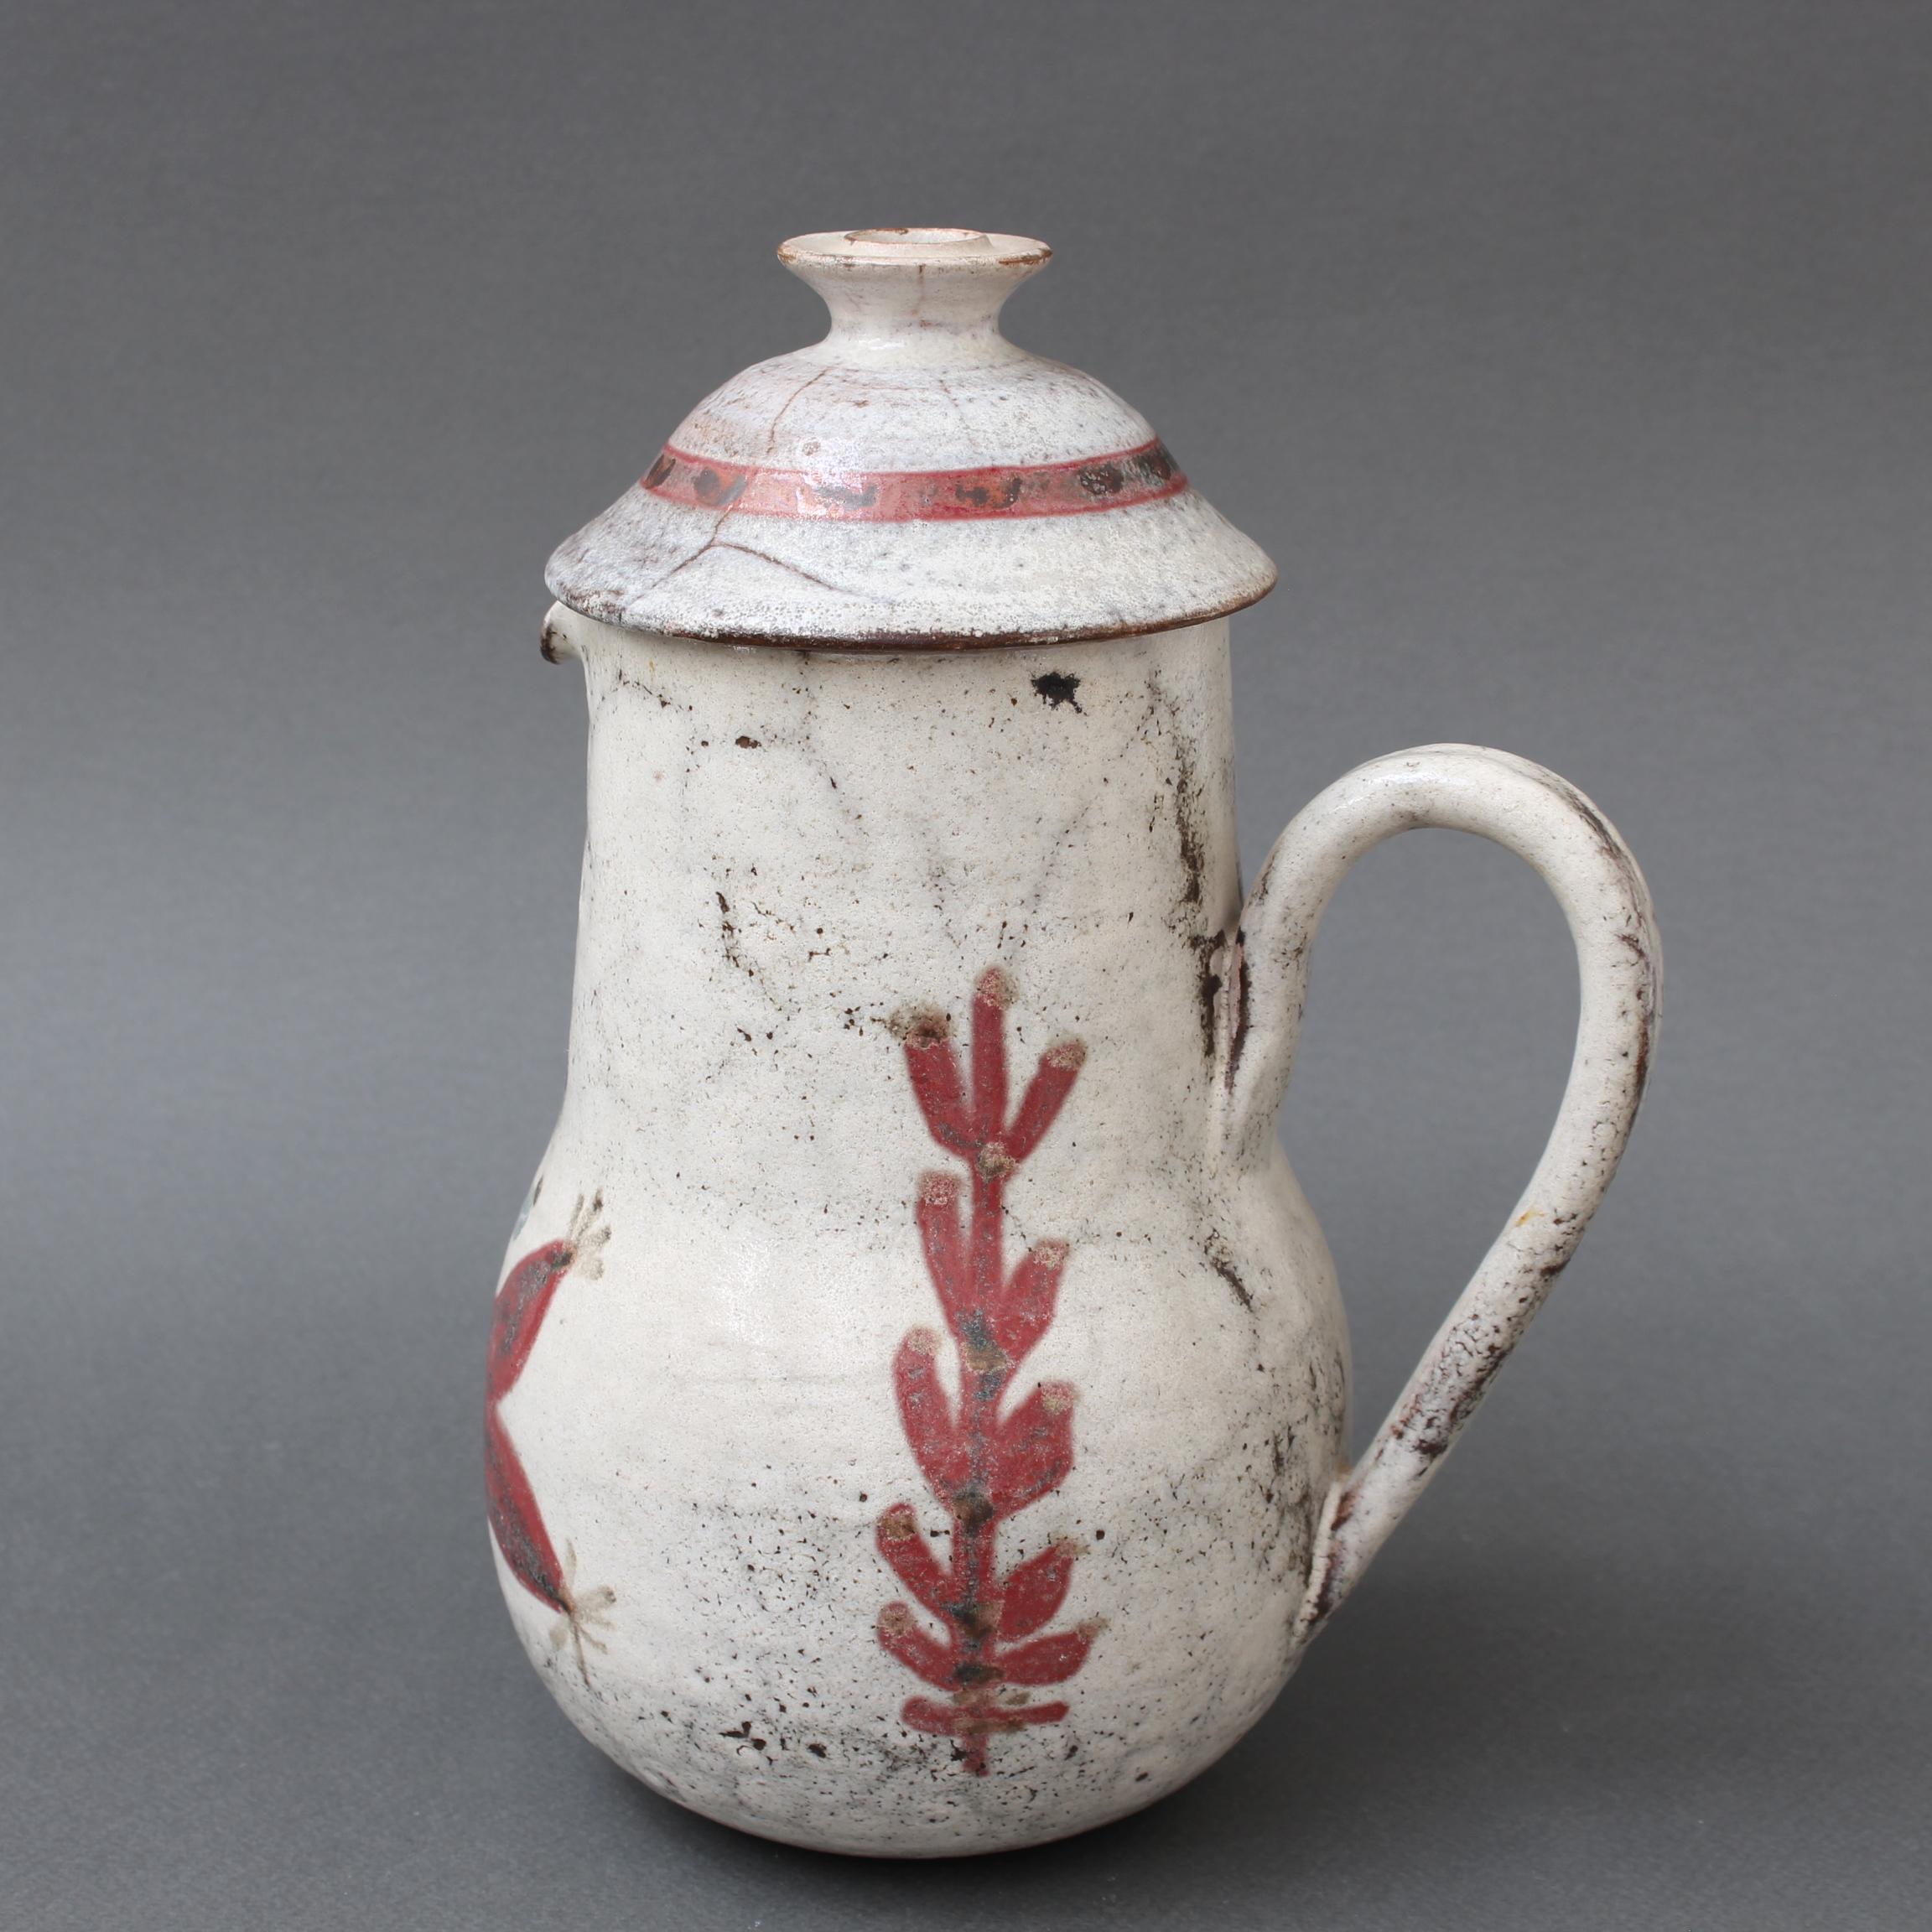 Midcentury French Ceramic Lidded Pitcher by Le Mûrier, 'circa 1960s' For Sale 4